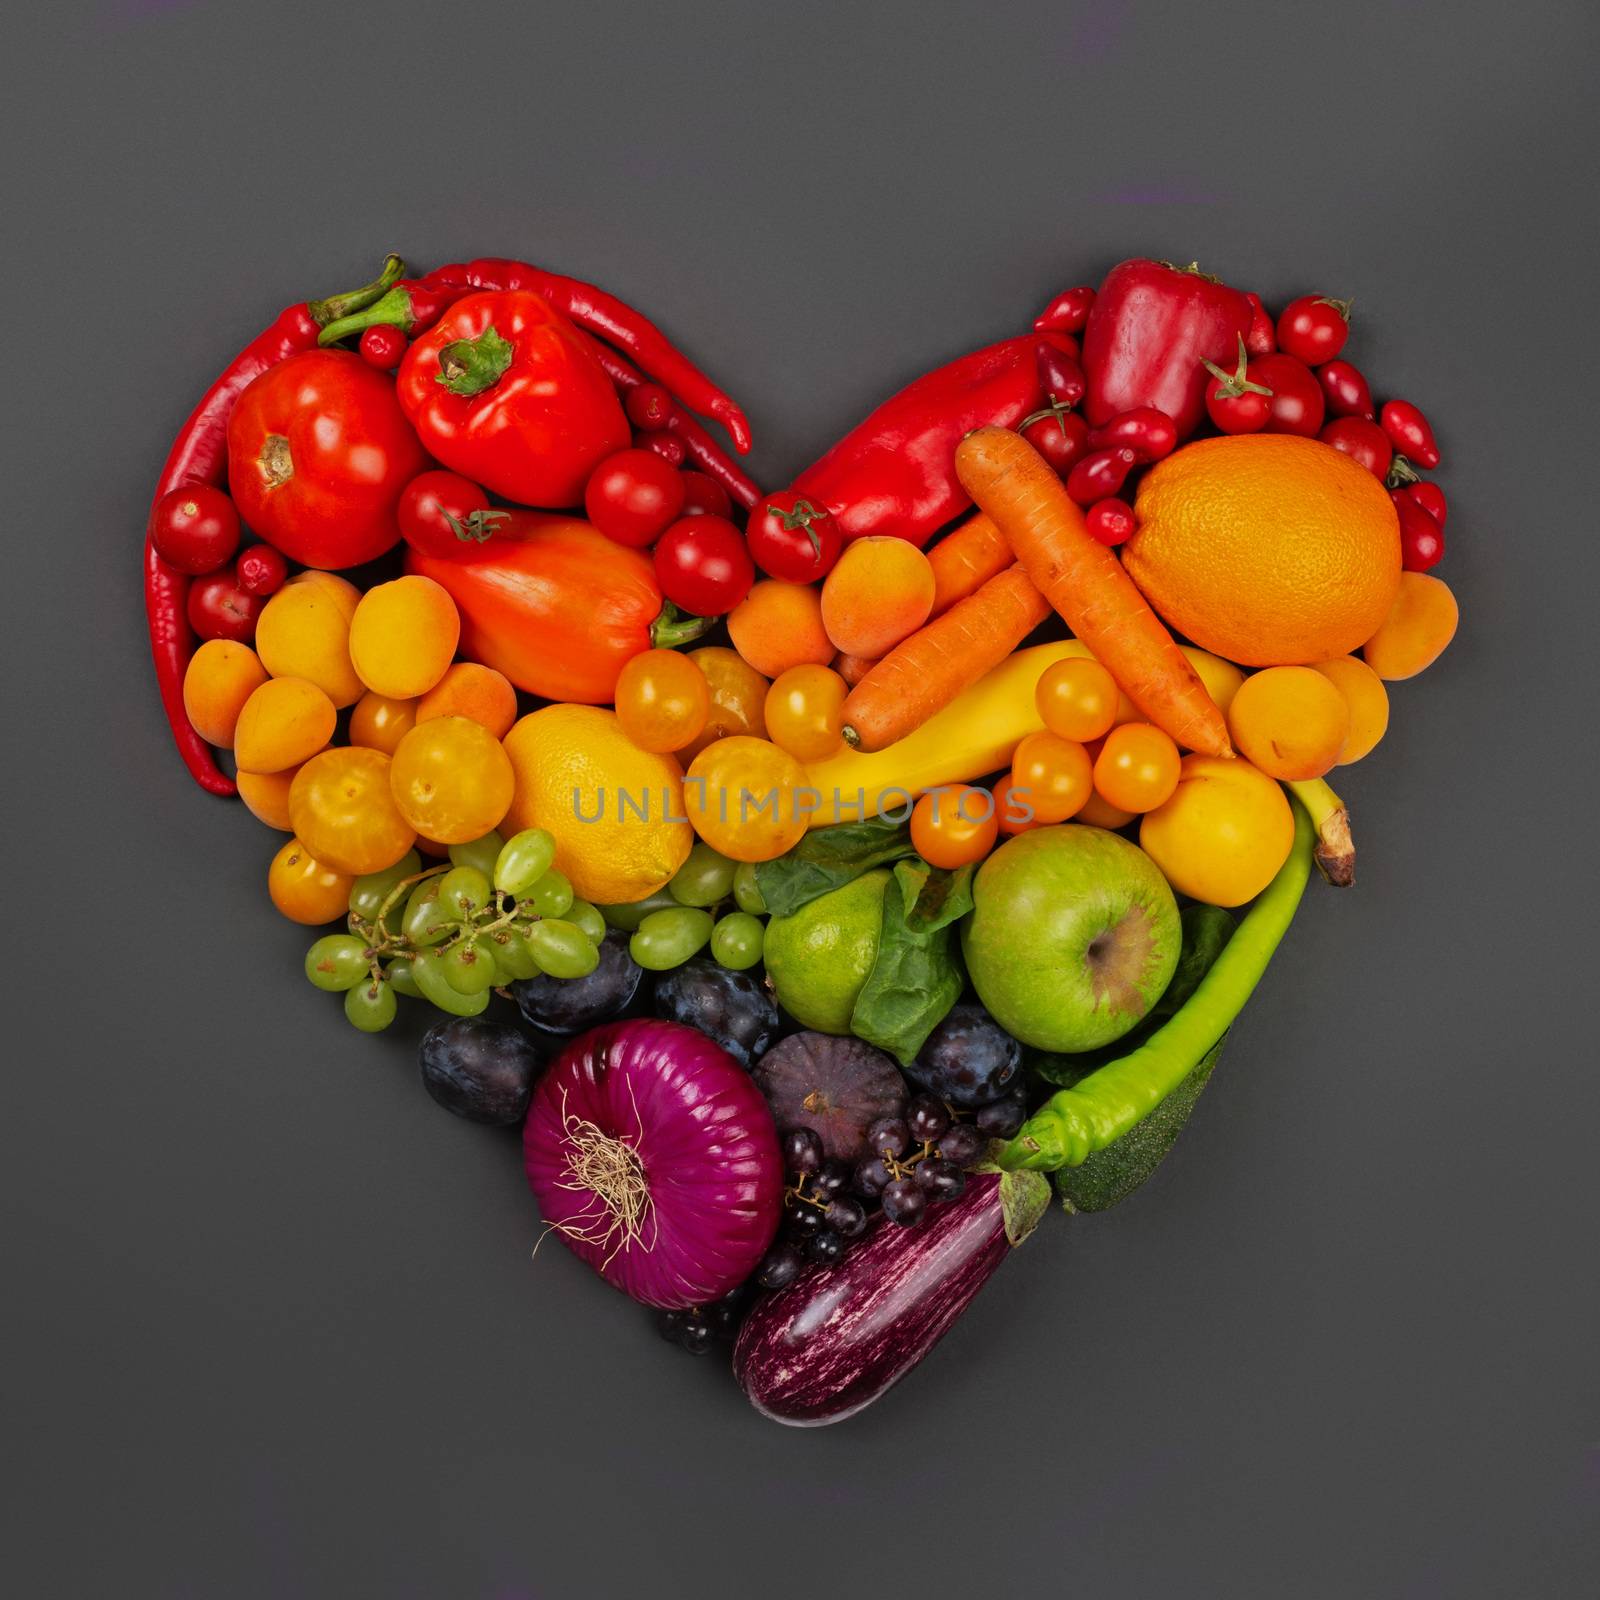 Rainbow heart of fruits and vegetables on gray background go vegetarian love healthy eating concept